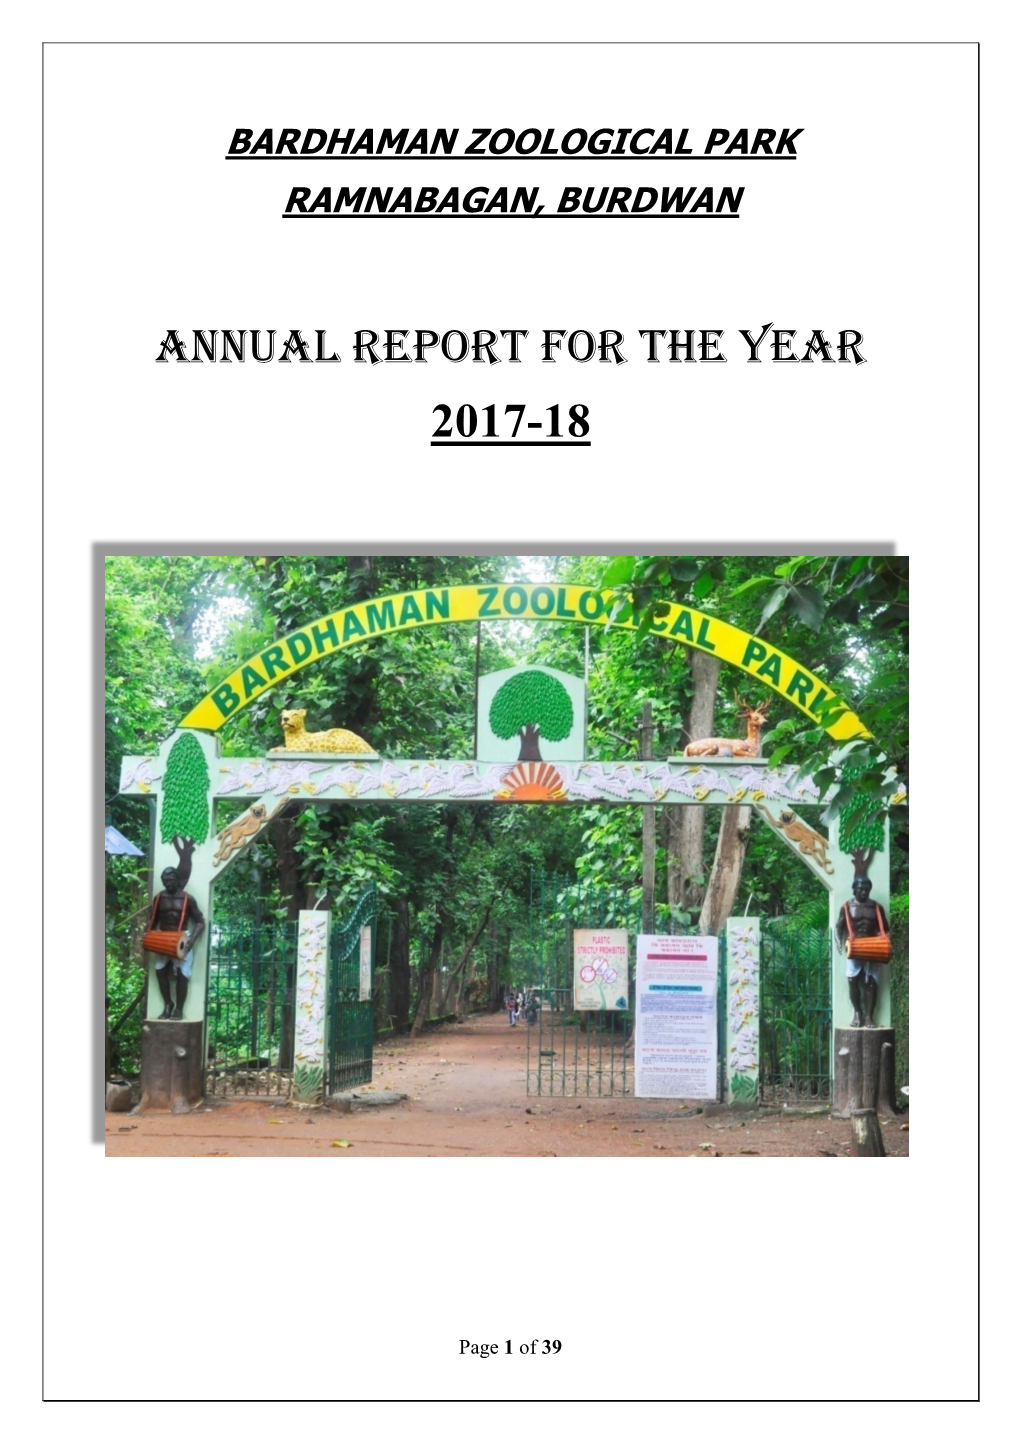 Annual Report for the Year 2017-18